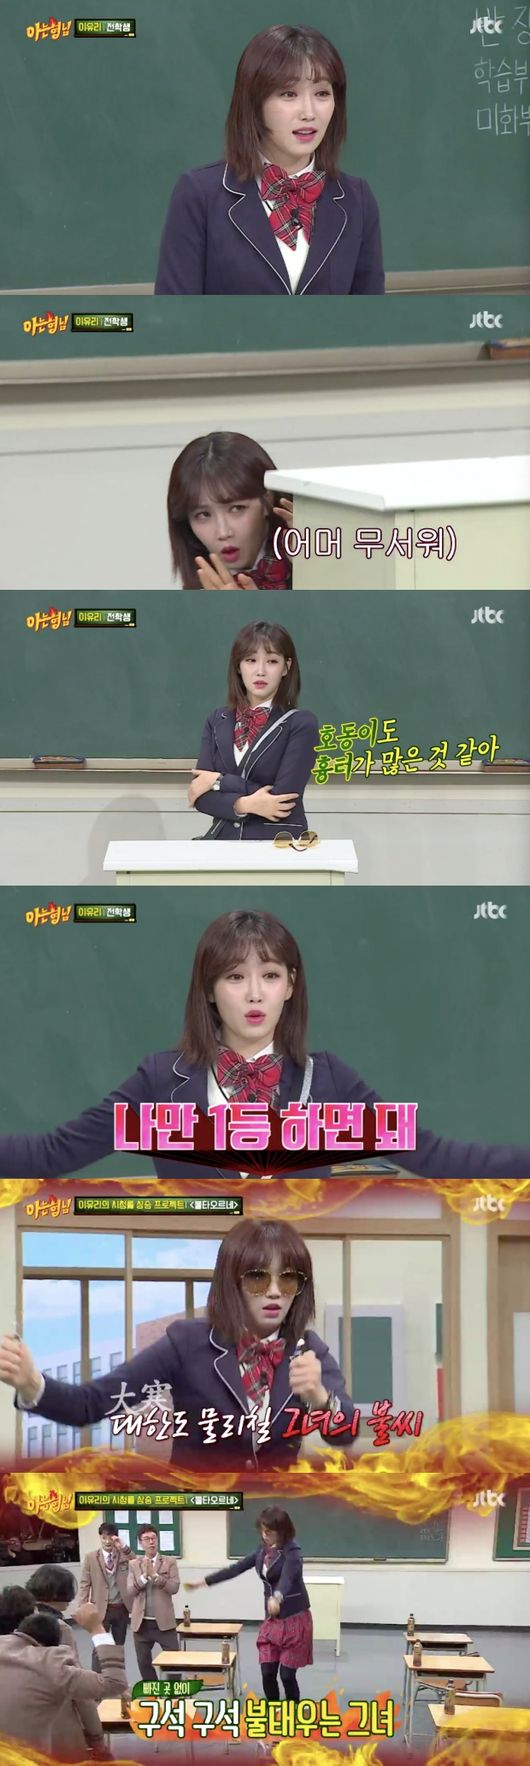 Lee Yoo-ri, who shines in the Smoke Grand Prize, showed his performance by showing hidden talents in the entertainment.Lee Yoo-ri appeared as a transfer student in JTBCs entertainment Knowing Bros, which aired on the 19th.Lee Yoo-ri introduced Lee Yoo-ri, who transferred from the school to I can blow you away with my eyes.When Lee Yoo-ri showed MBC weekend drama Hide and Seek last year, he laughed because he honestly confessed that the high ratings of Knowing Bros were concerned.She was frankly honest about her thoughts without pretence and got the favorable feeling of Knowing BrosLee Yoo-ri, however, said, Now (the same time zone ratings) have nothing to do with me (laughs). I should be the number one person who comes out.Despite appearing as a solo guest, her positivity surpassed the group.Lee Yoo-ri said, I will burn Knowing Bros today, and I will set my brothers and sisters on fire.He performed cover dances to BTSs Burning Orne, and he showed an outspoken move toward entertainment by singing the OST of the drama Hide and Seek.Kang Ho-dong Lee Soo-geun Kim Hee-cheol and other members optimized for entertainment were guests to like.Kang Ho-dong, who watched Lee Yoo-ris dance and song, praised I saw the class of acting.Lee Yoo-ri recalled Kang Ho-dongs entertainment X Man Sunday (2006), saying, I was a rookie at the time, and Kang Ho-dong, who was on his birthday, was surrounded by staff and cast members and was like a king.I ignored him that day, looking me up and down. Kang Ho-dong was unhappy, but expressed satisfaction with her bomb remarks.Lee Yoo-ri has played various characters from good daughter-in-law to villain in many dramas, but his favorite genre is comic.Lee Yoo-ri, who is currently filming a new drama Spring Comes, said, I like comics. Its fun in the field when Im doing comics.We get energy, he said.Lee Yoo-ri, who is full of the wrong side, overpowered the members of Knowing Bros by showing a hot gesture.Knowing Bros screen capture